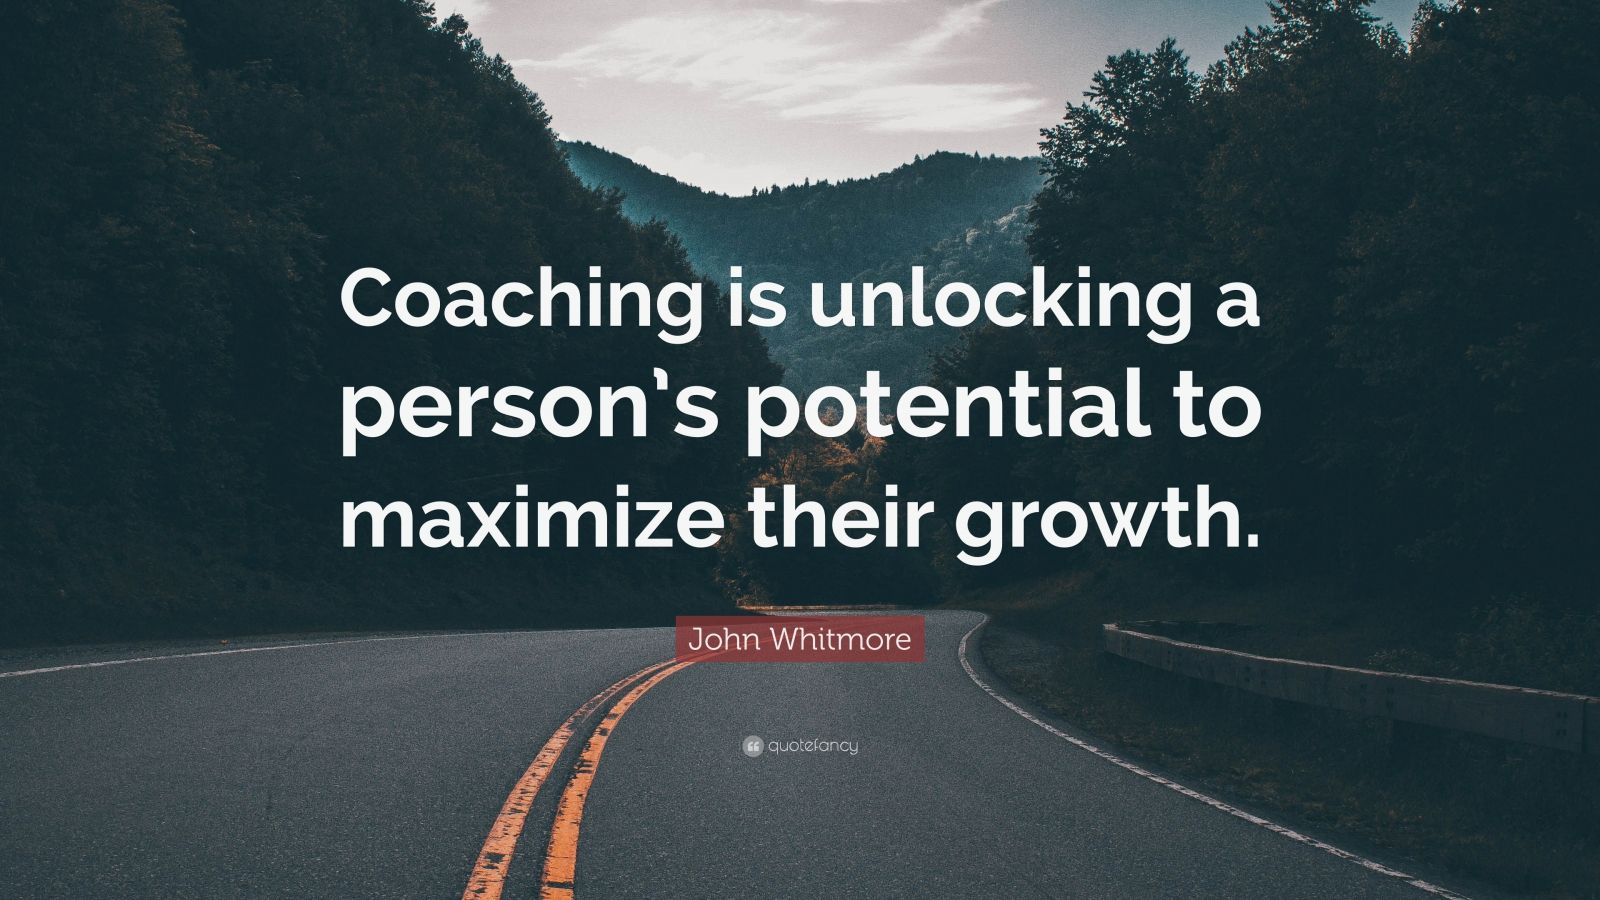 John Whitmore Quote “Coaching is unlocking a person’s